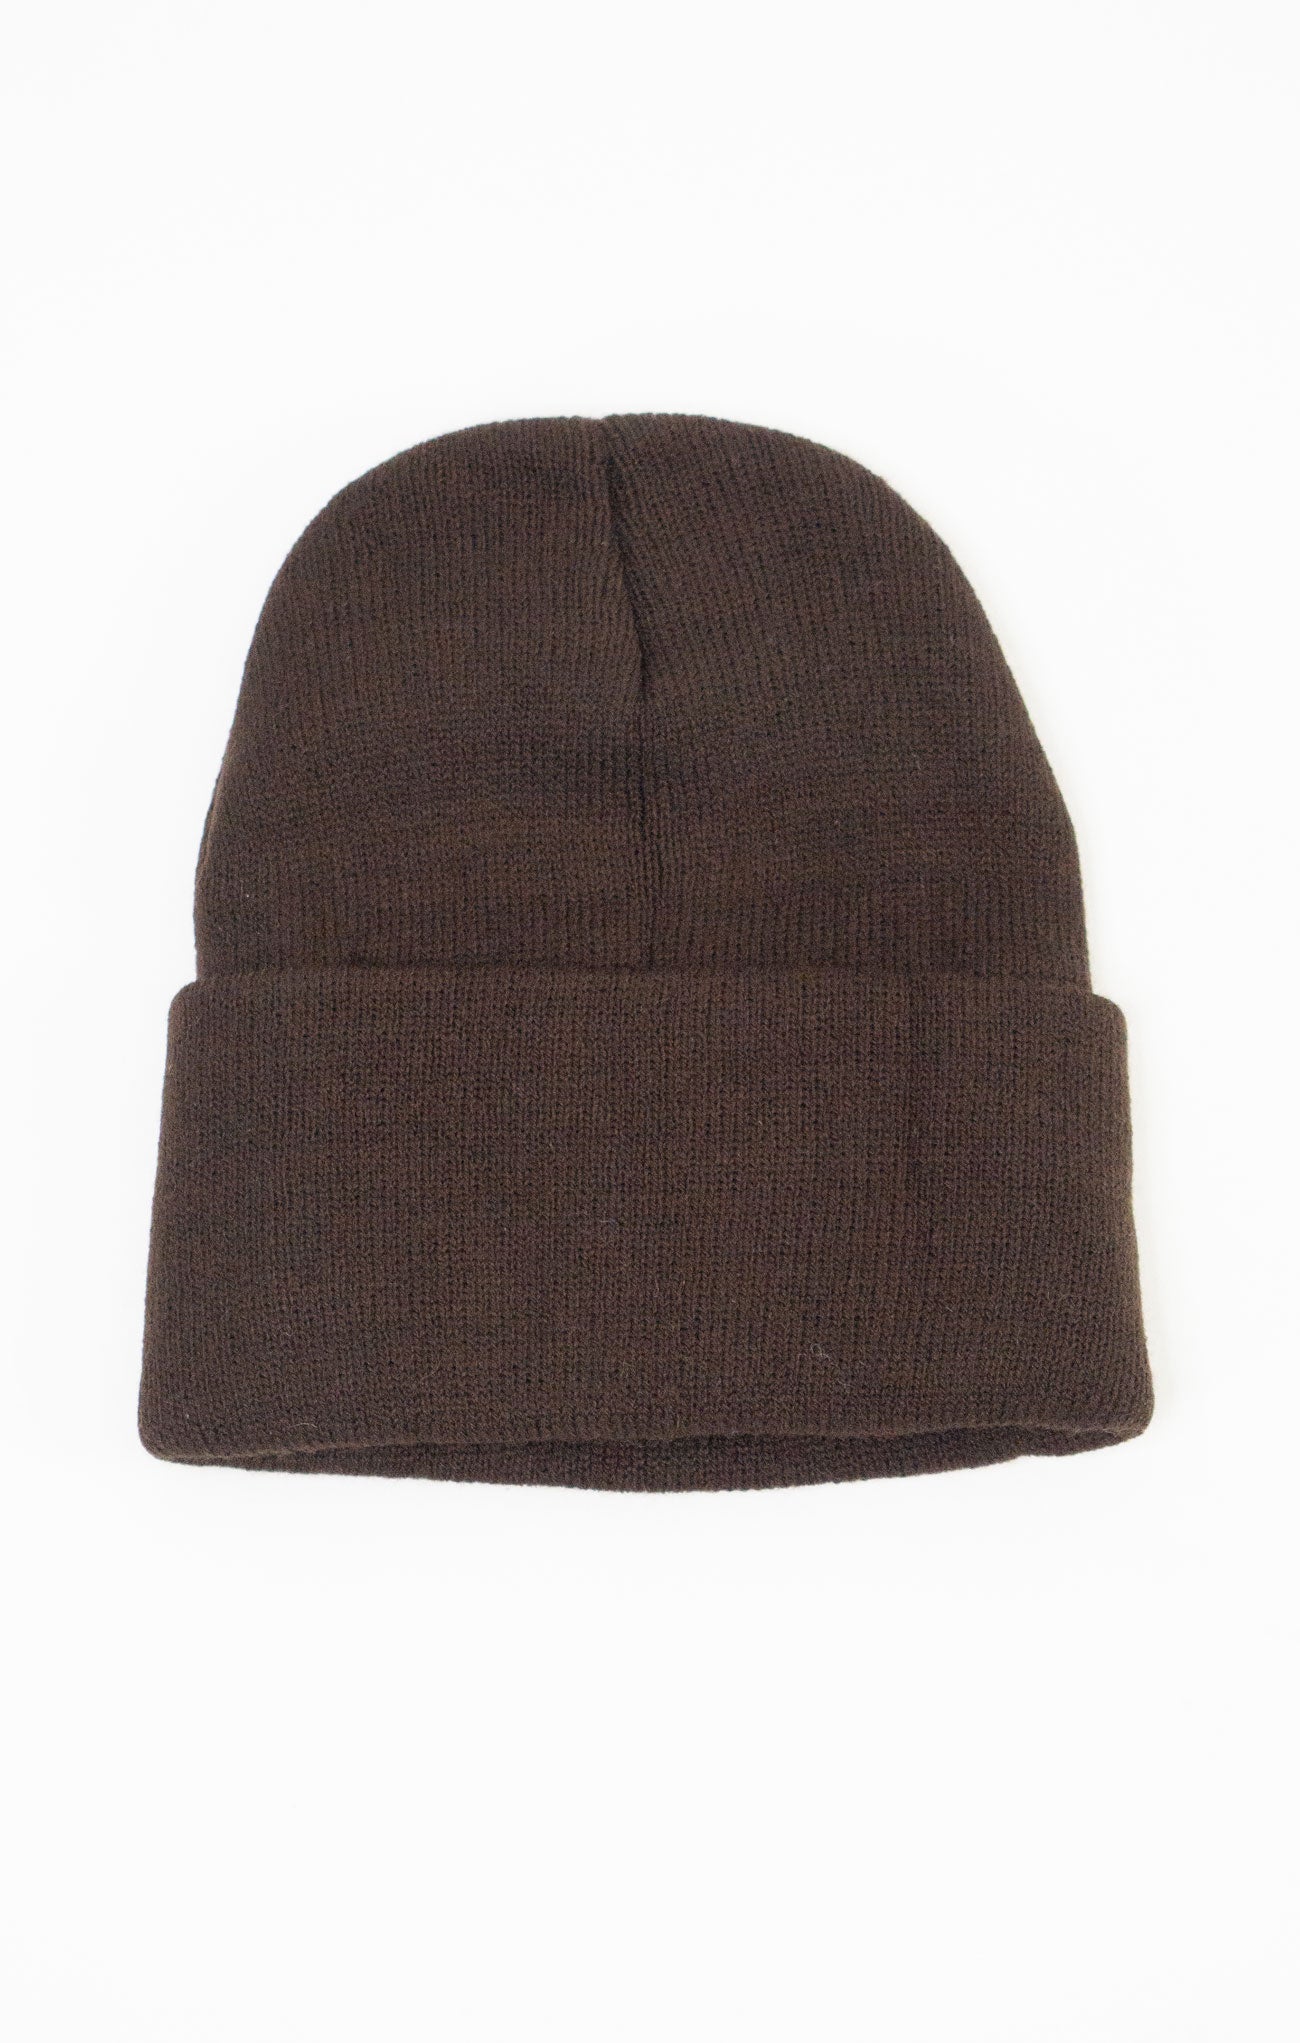 SOLID COLOR CLASSIC BEANIE-chocolate,maroon,beige,simple beanie,fold over rim